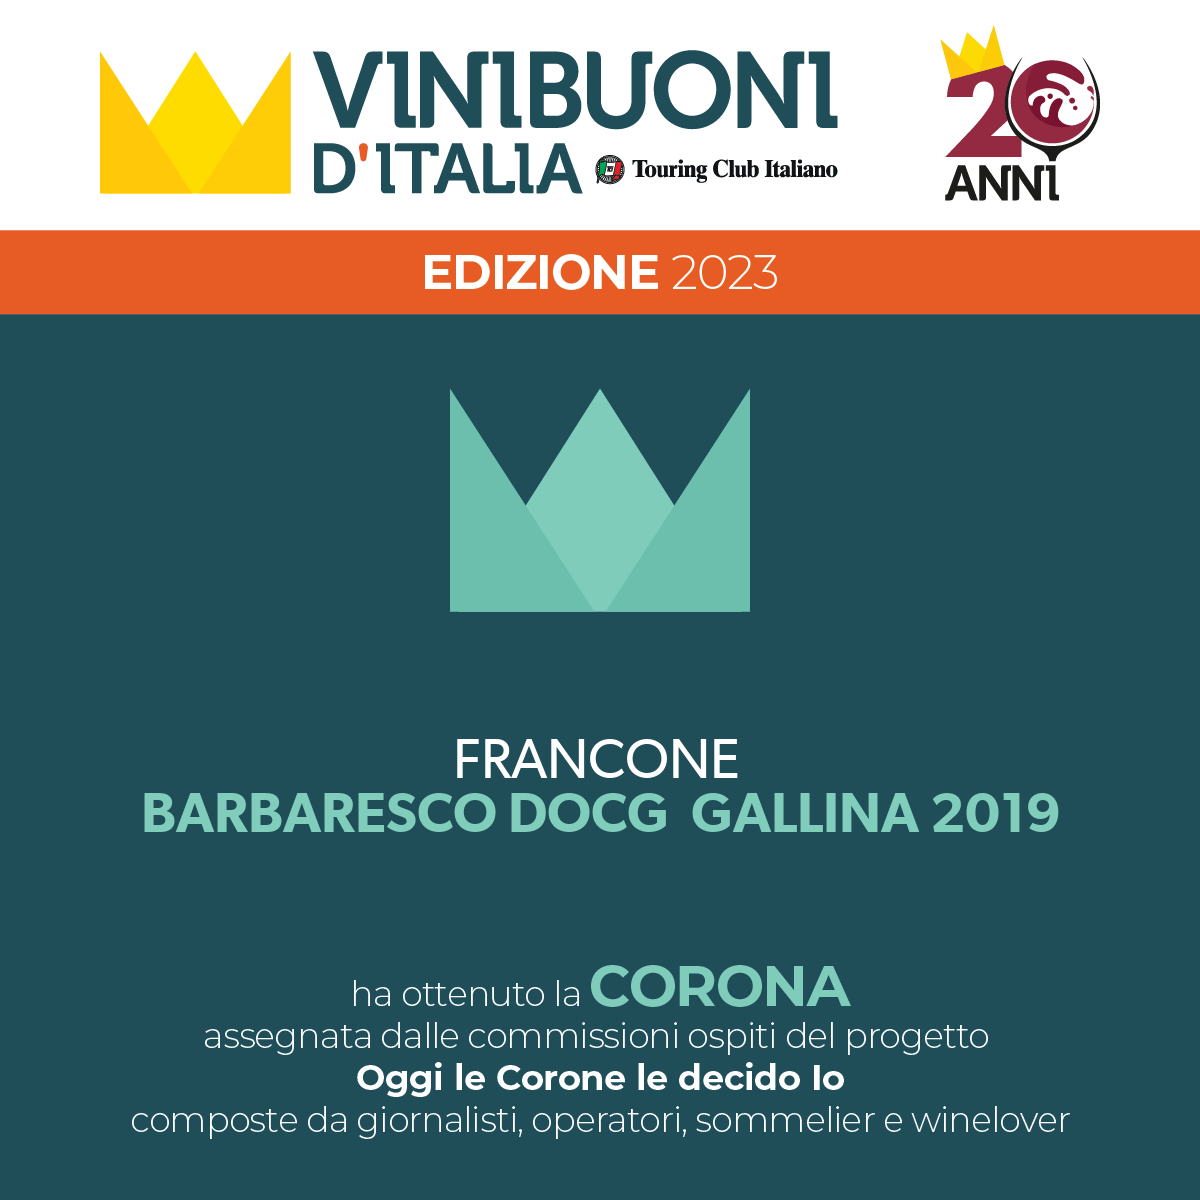 Two Crowns for our Barbaresco Gallina 2019